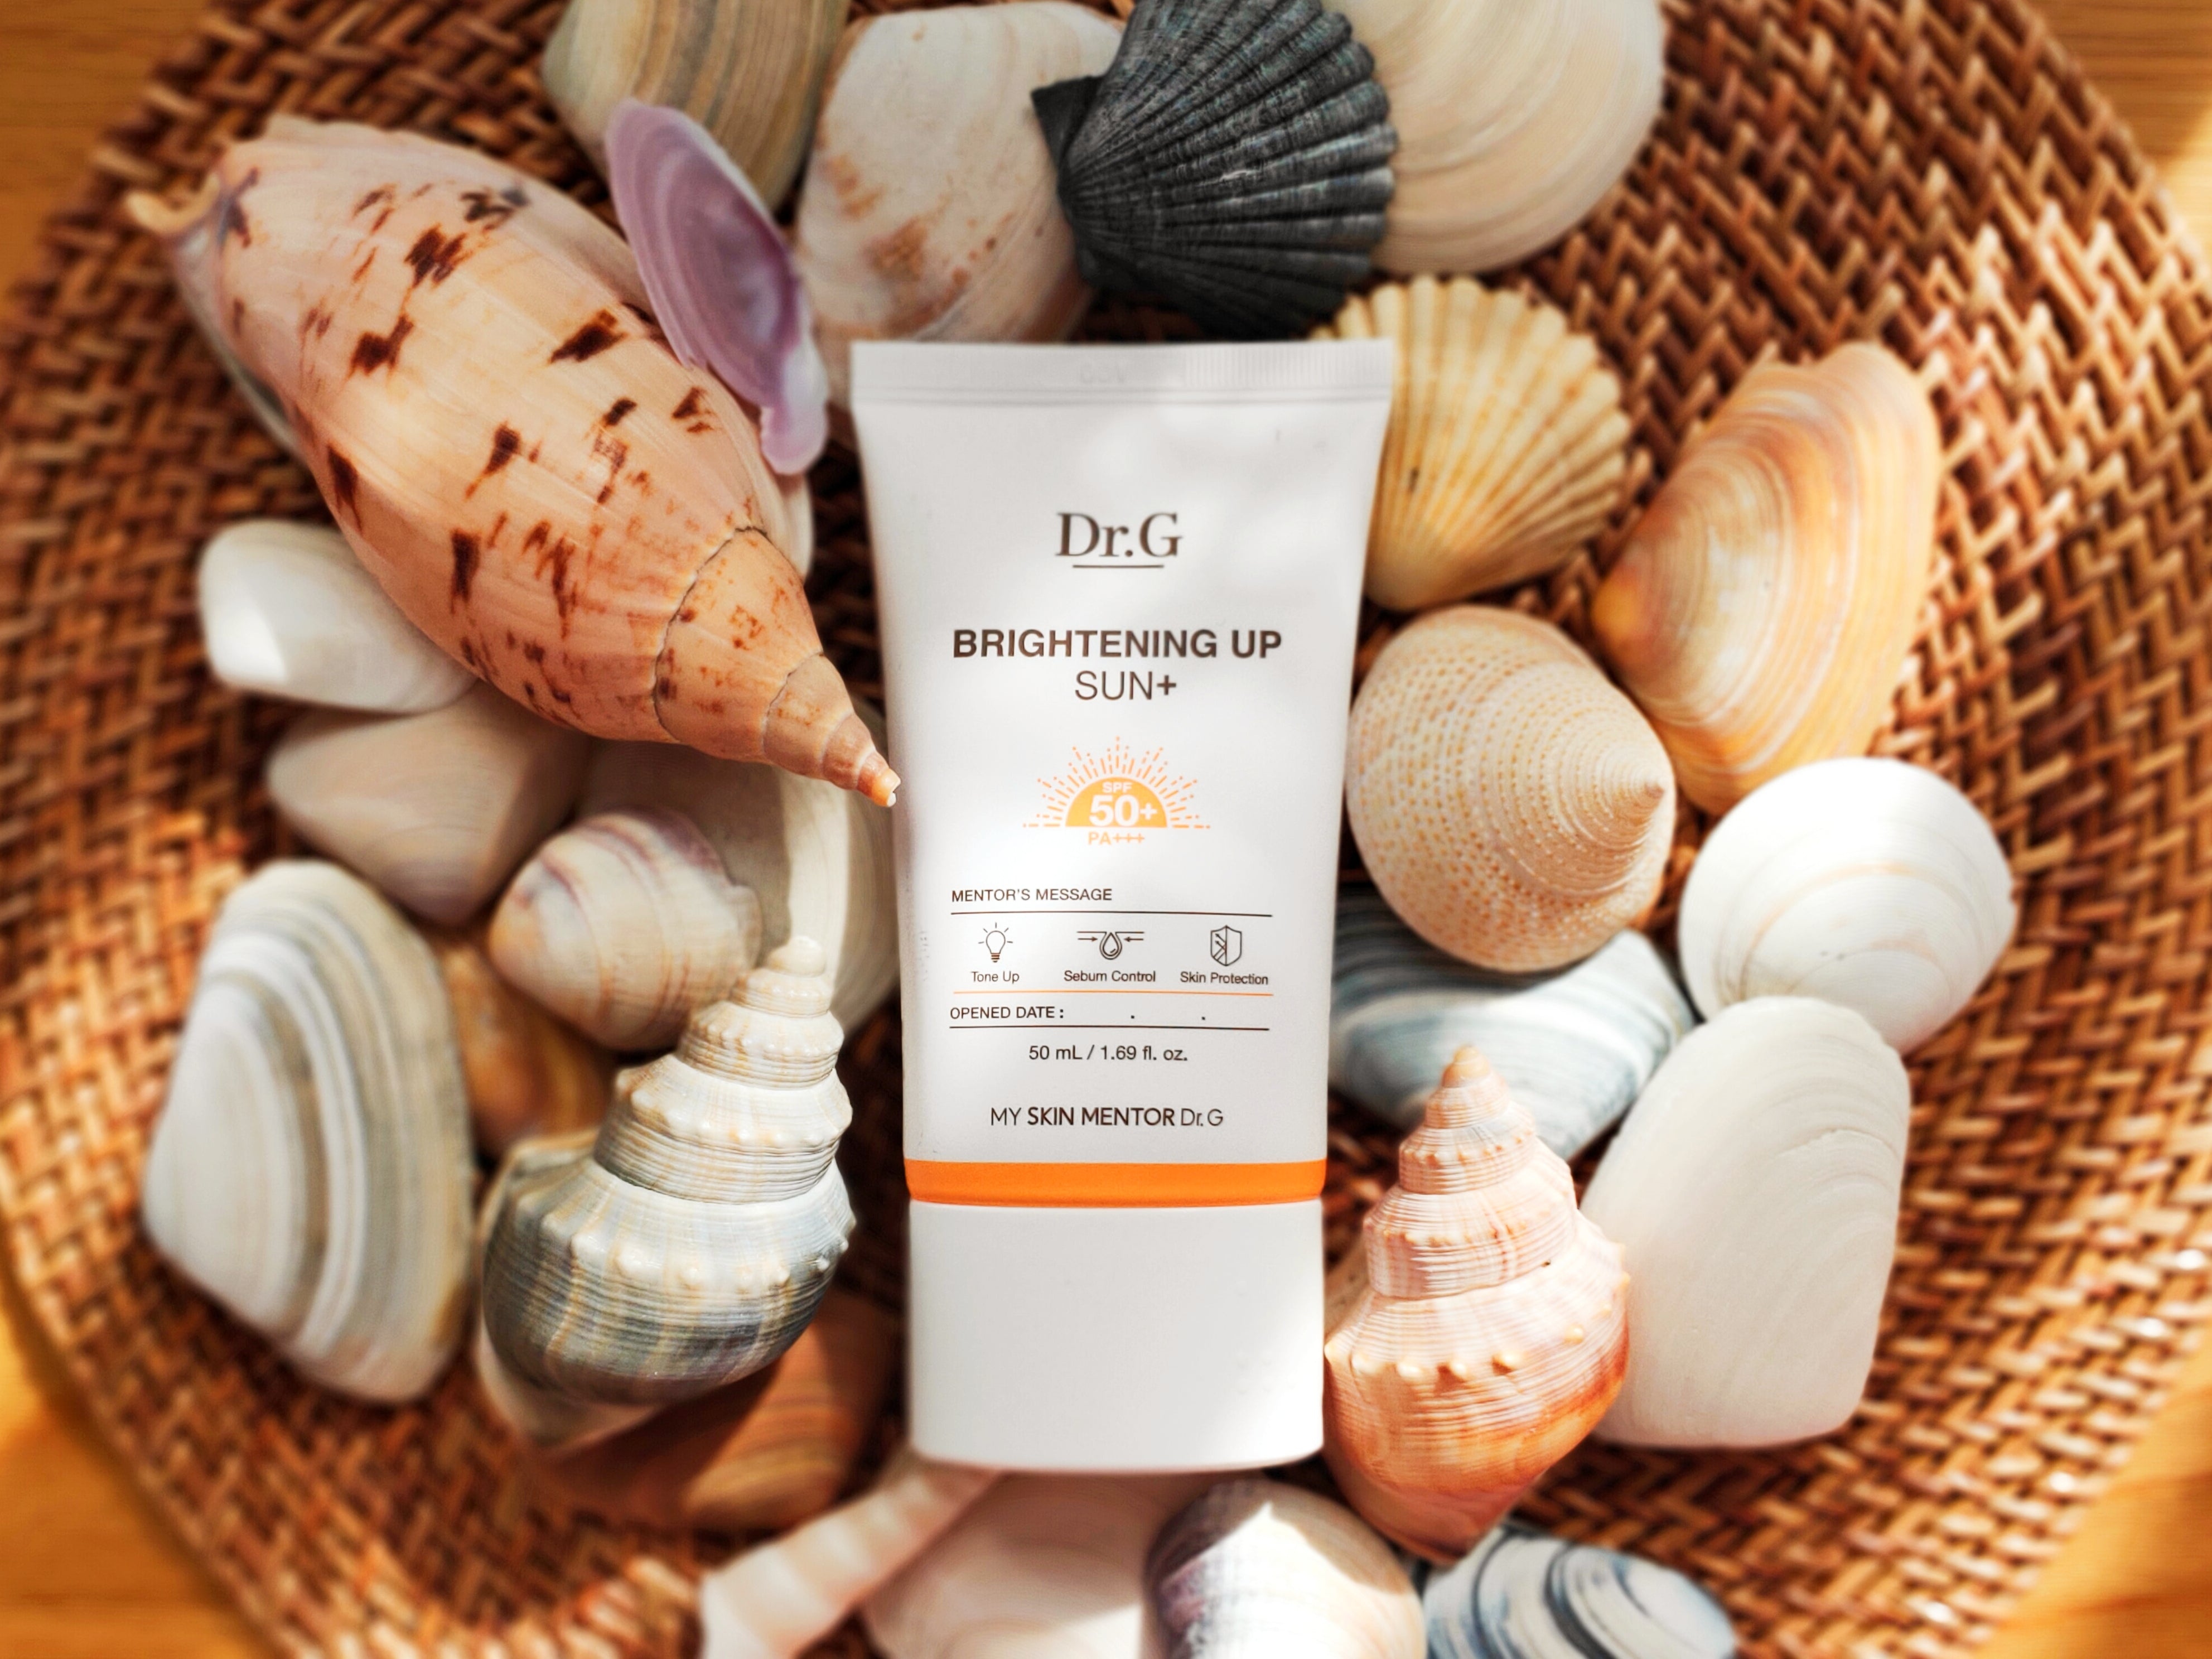 HI-REVIEW : Dr.G Brightening Up Sun+ SPF50+ PA++++